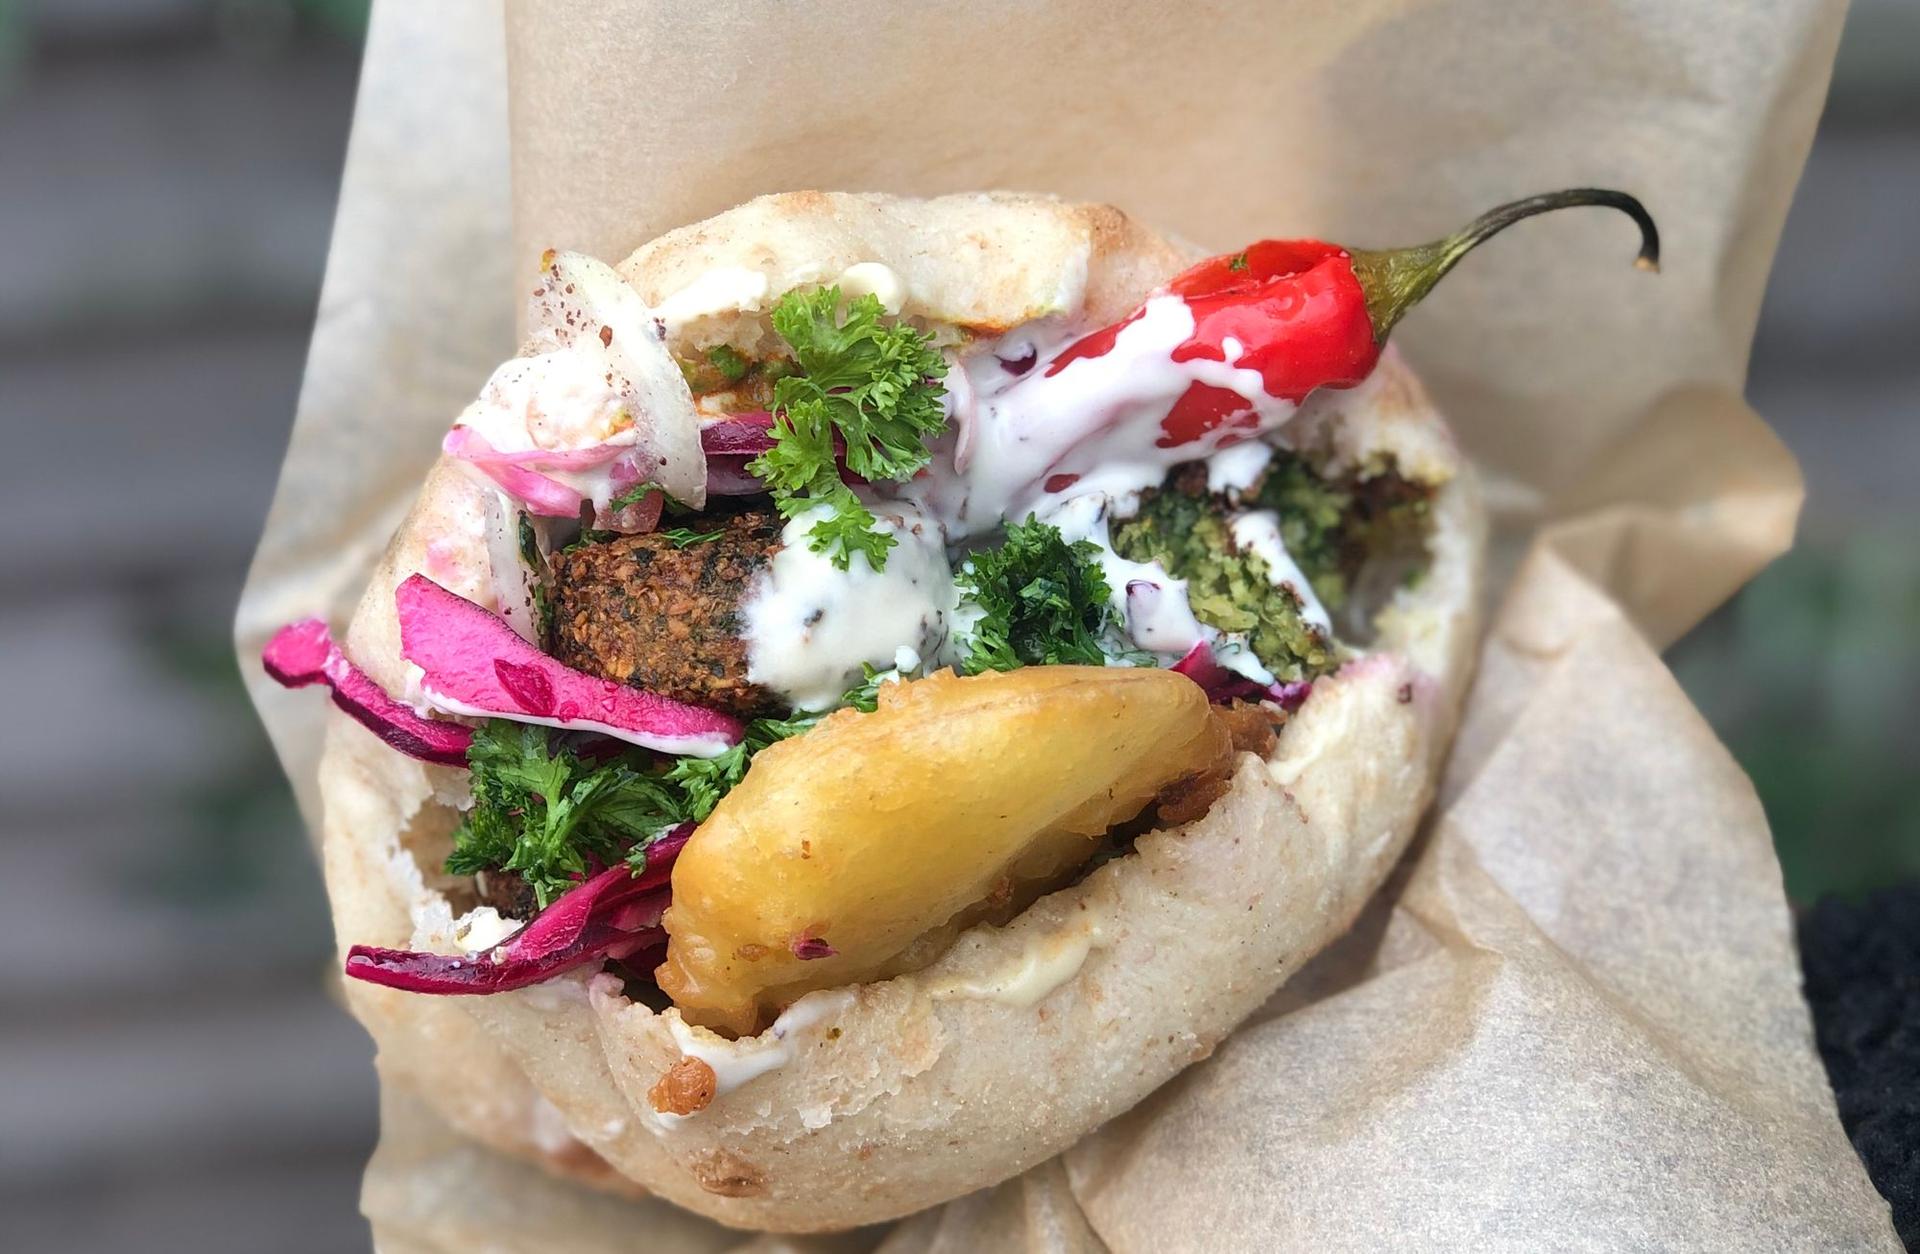 Pockets: The union of fluffy pita bread and crunchy green falafels